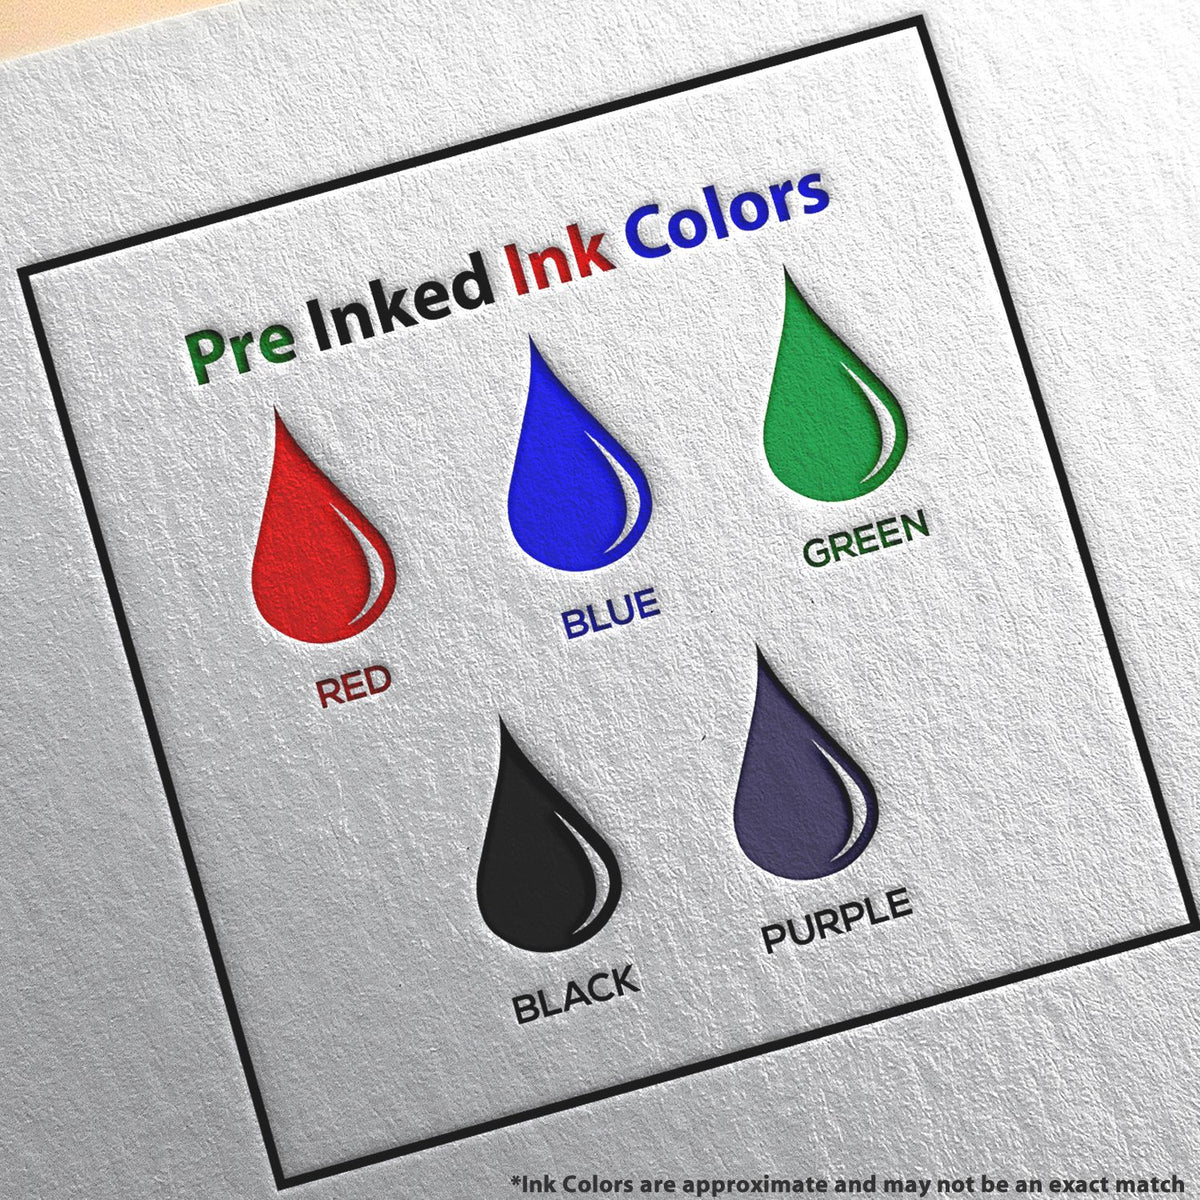 A picture showing the different ink colors or hues available for the Slim Pre-Inked Rectangular Notary Stamp for Oregon product.